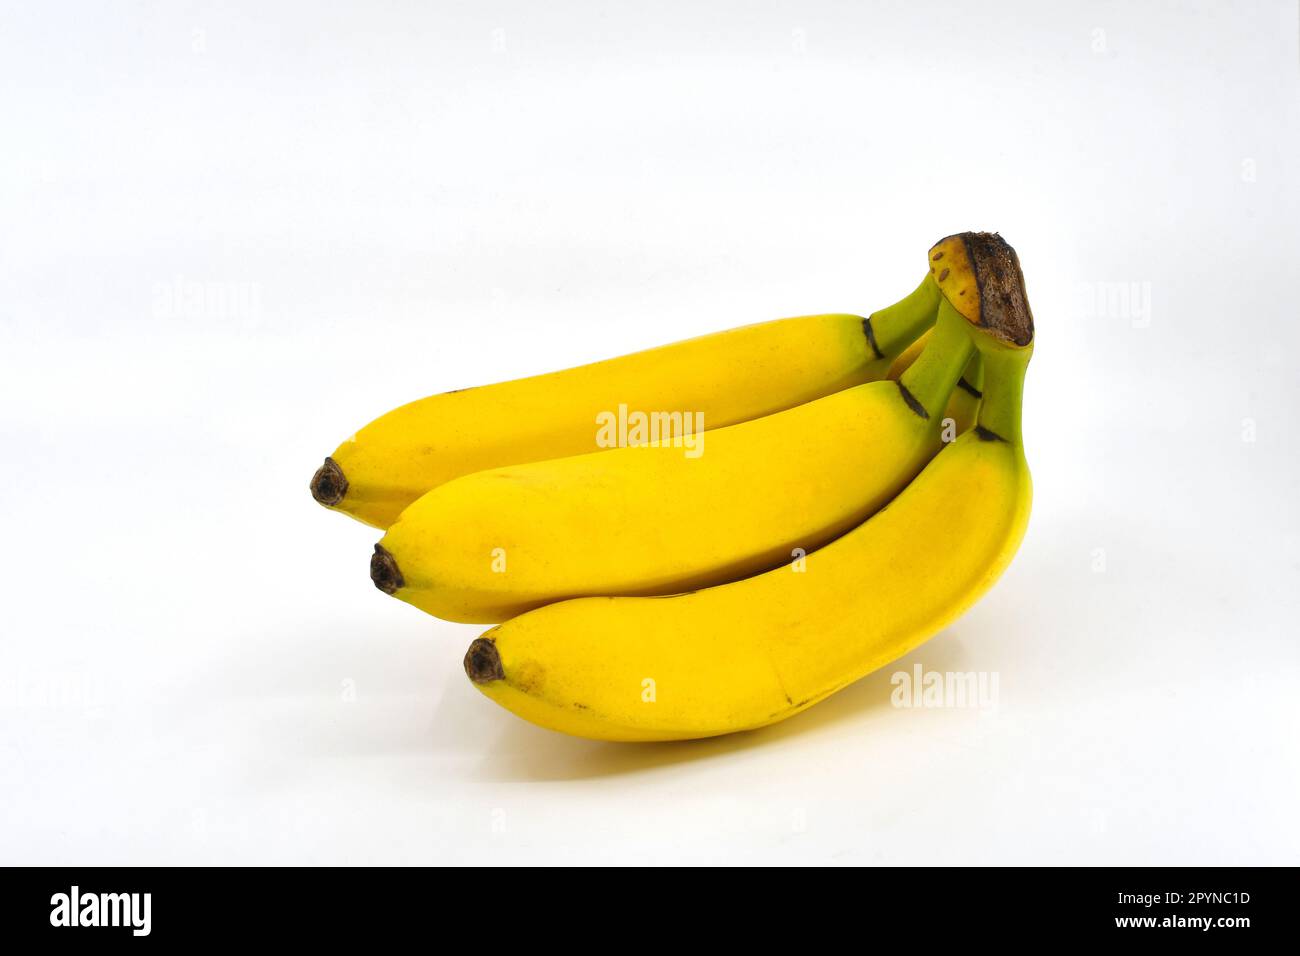 Bunch of fresh ripe bananas isolated on a plain white background. Copy space. Stock Photo